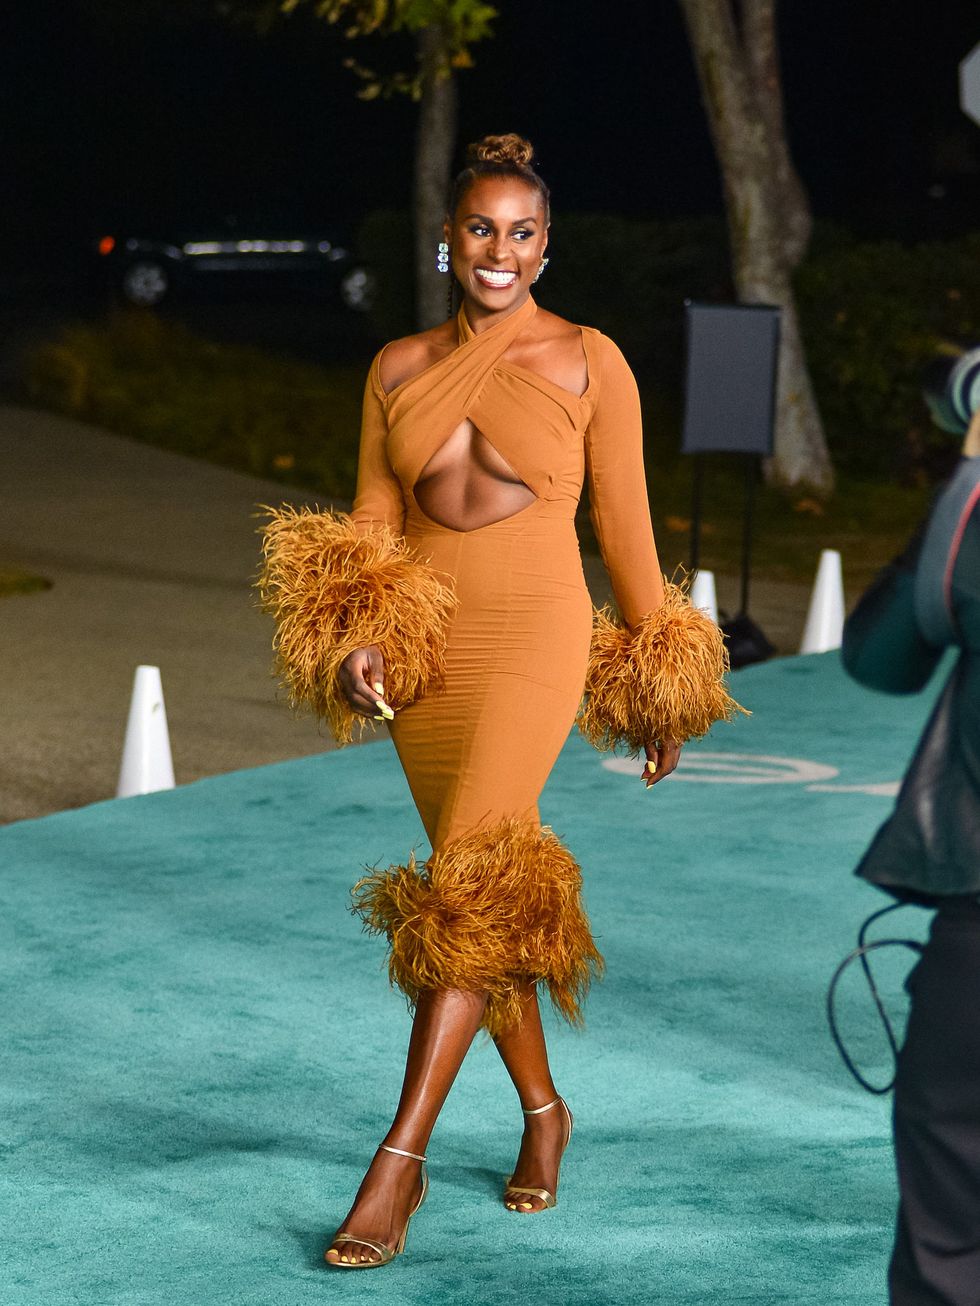 los angeles, ca   october 21 issa rae is seen on october 21, 2021 in los angeles, california  photo by jocebauer griffingc images